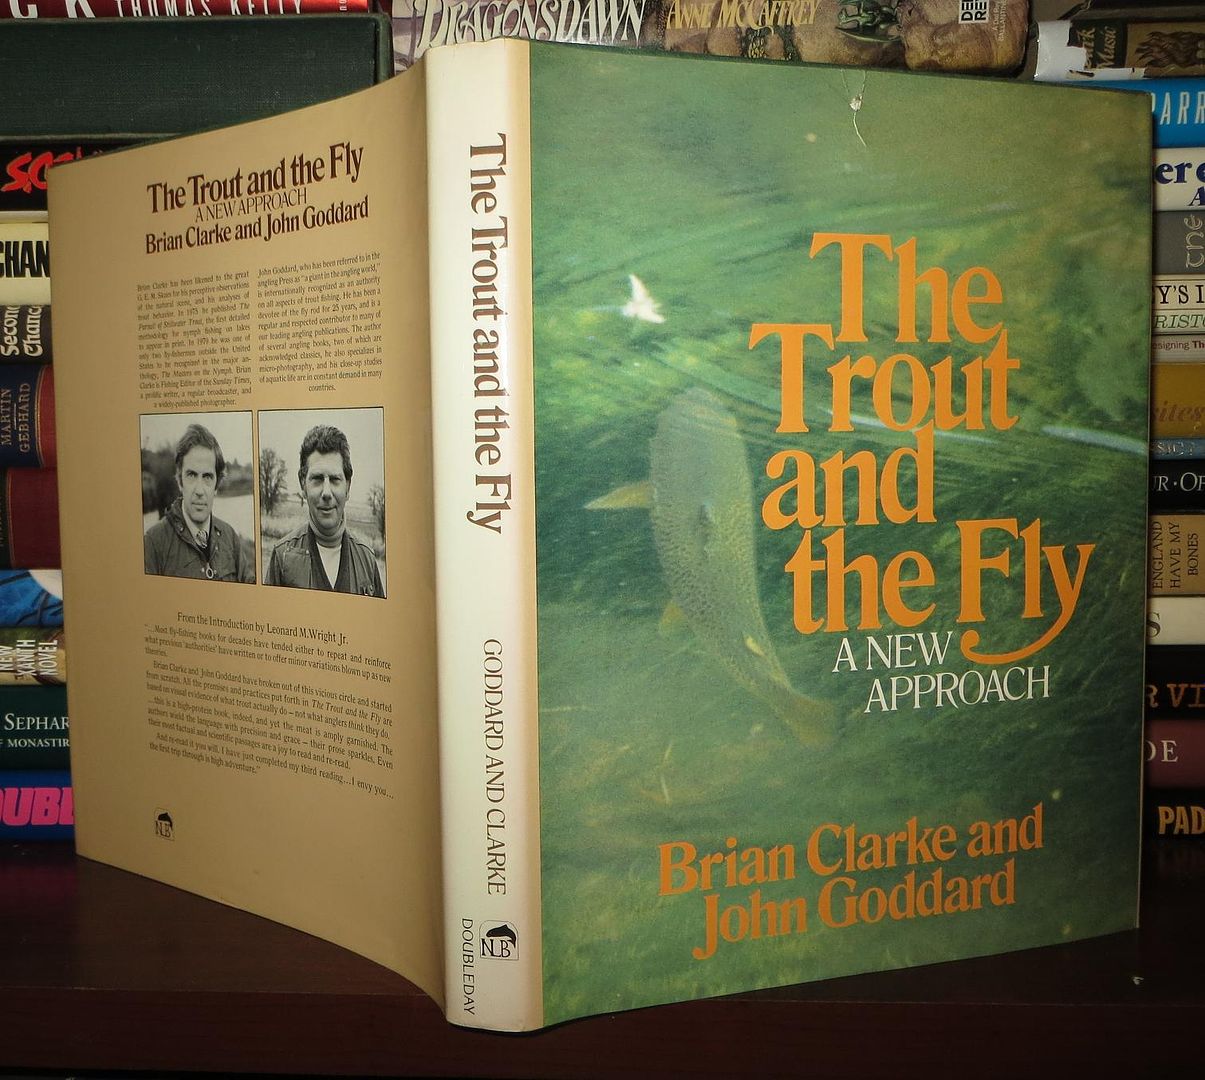 GODDARD, JOHN - The Trout and the Fly a New Approach